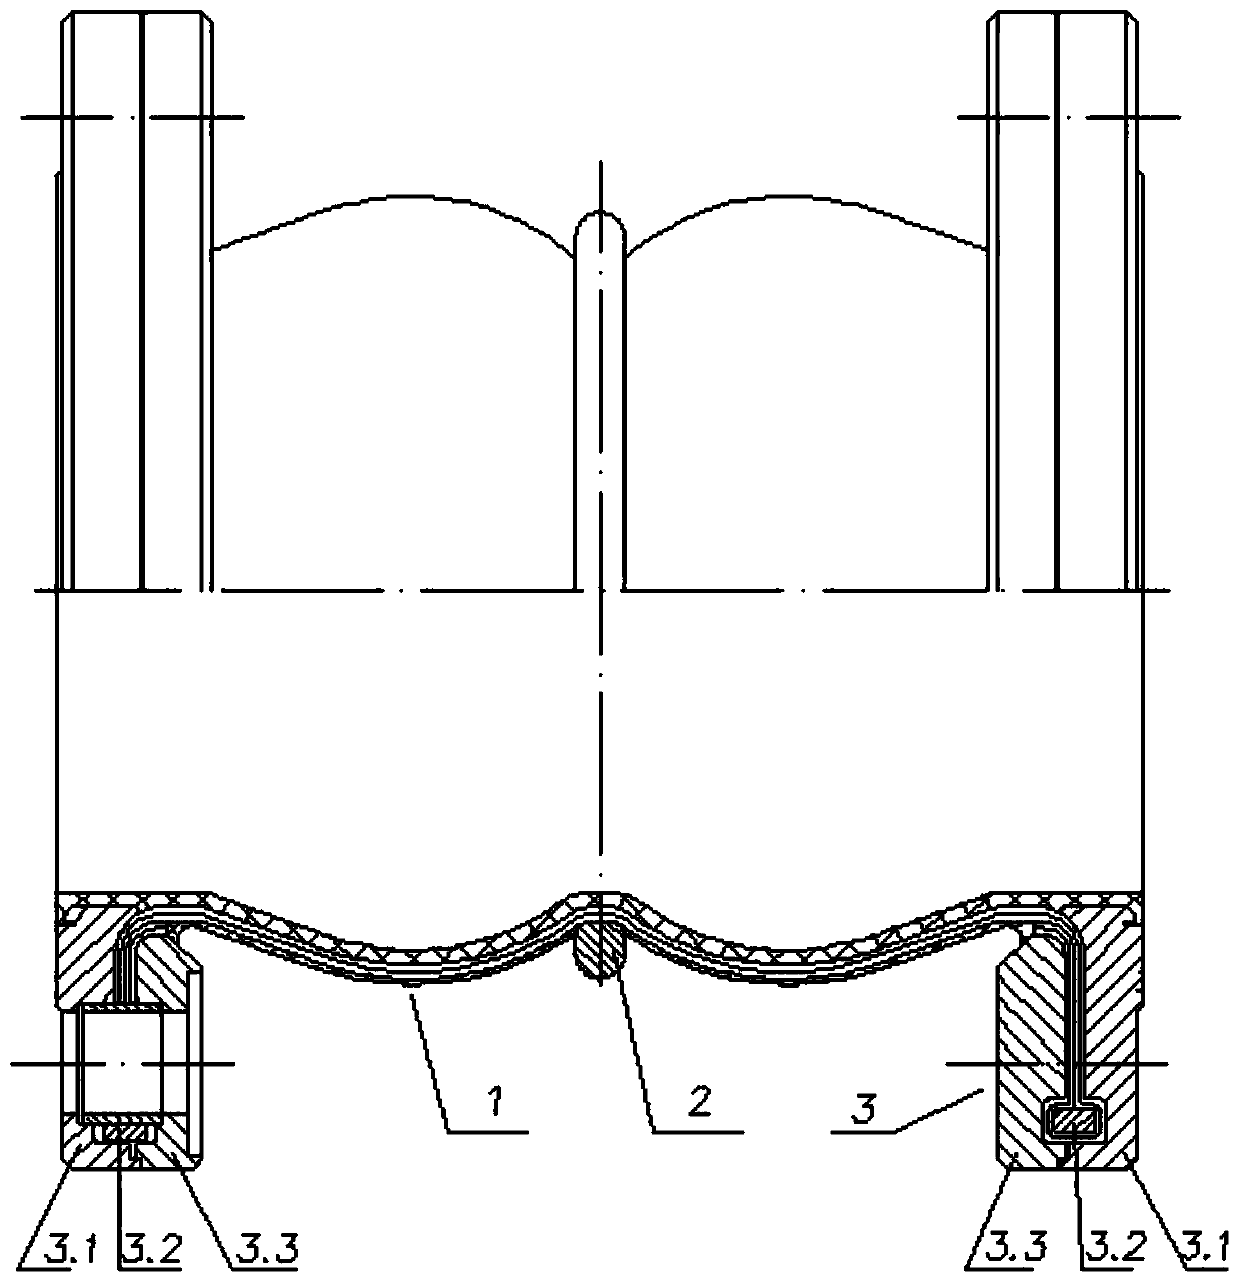 Symmetrical hyperboloid vibration reduction connecting pipe for combined flanges with self-locking function and manufacturing method